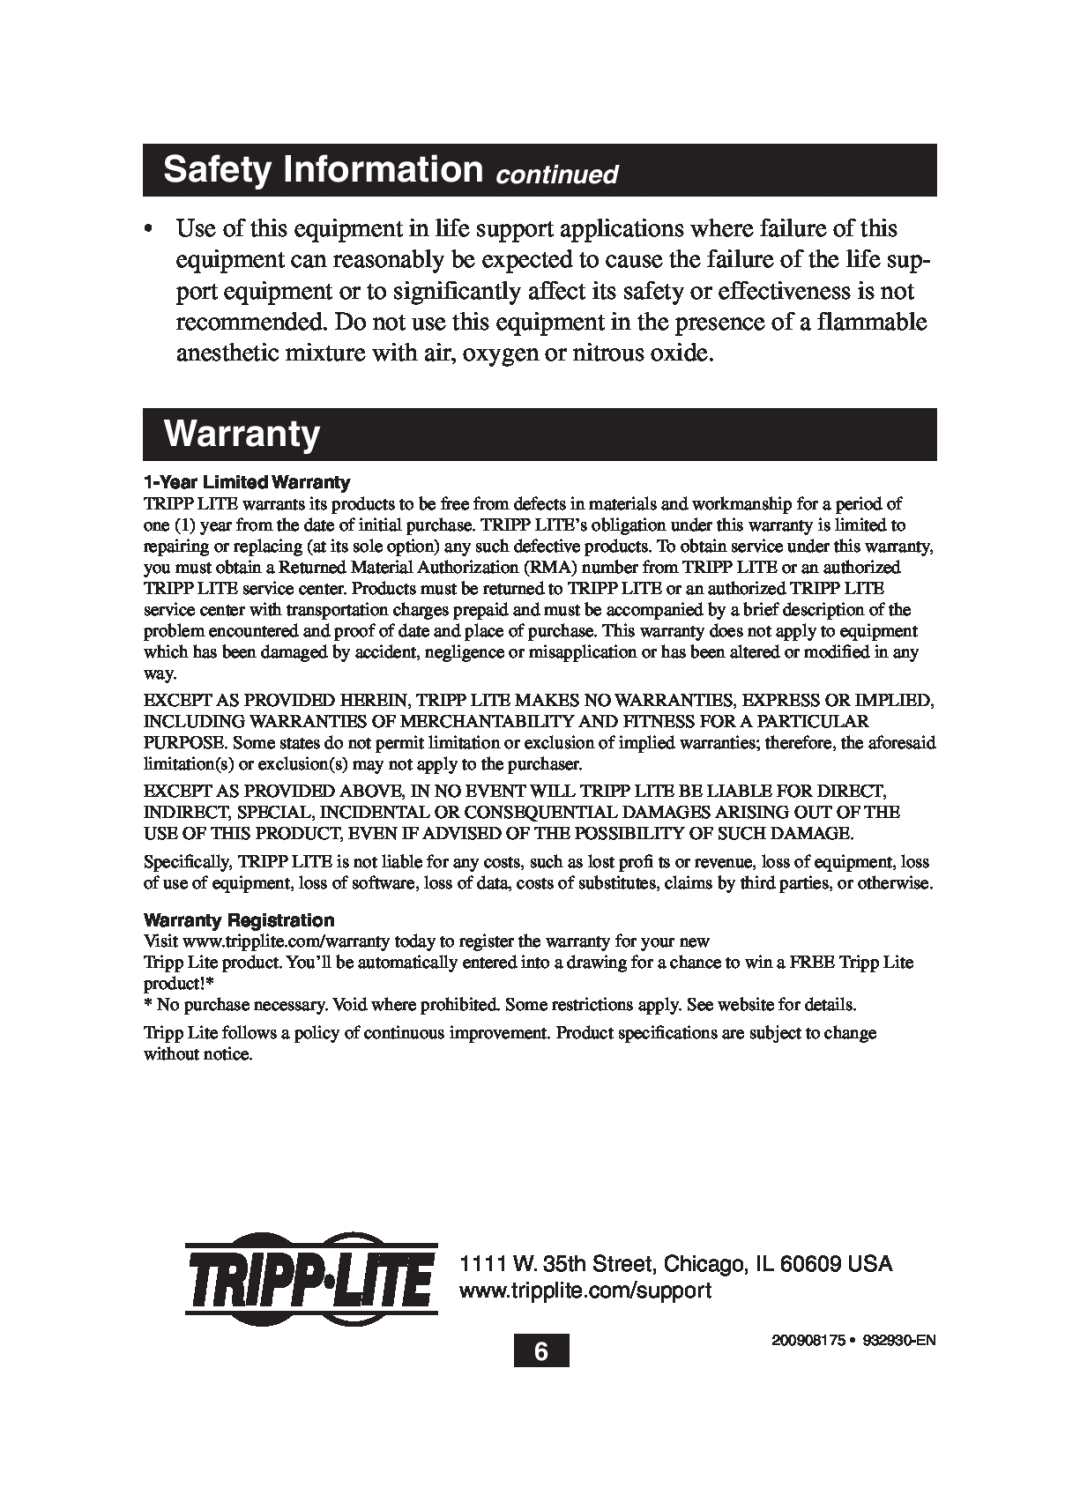 Tripp Lite B130-101S owner manual Safety Information continued, Year Limited Warranty, Warranty Registration 